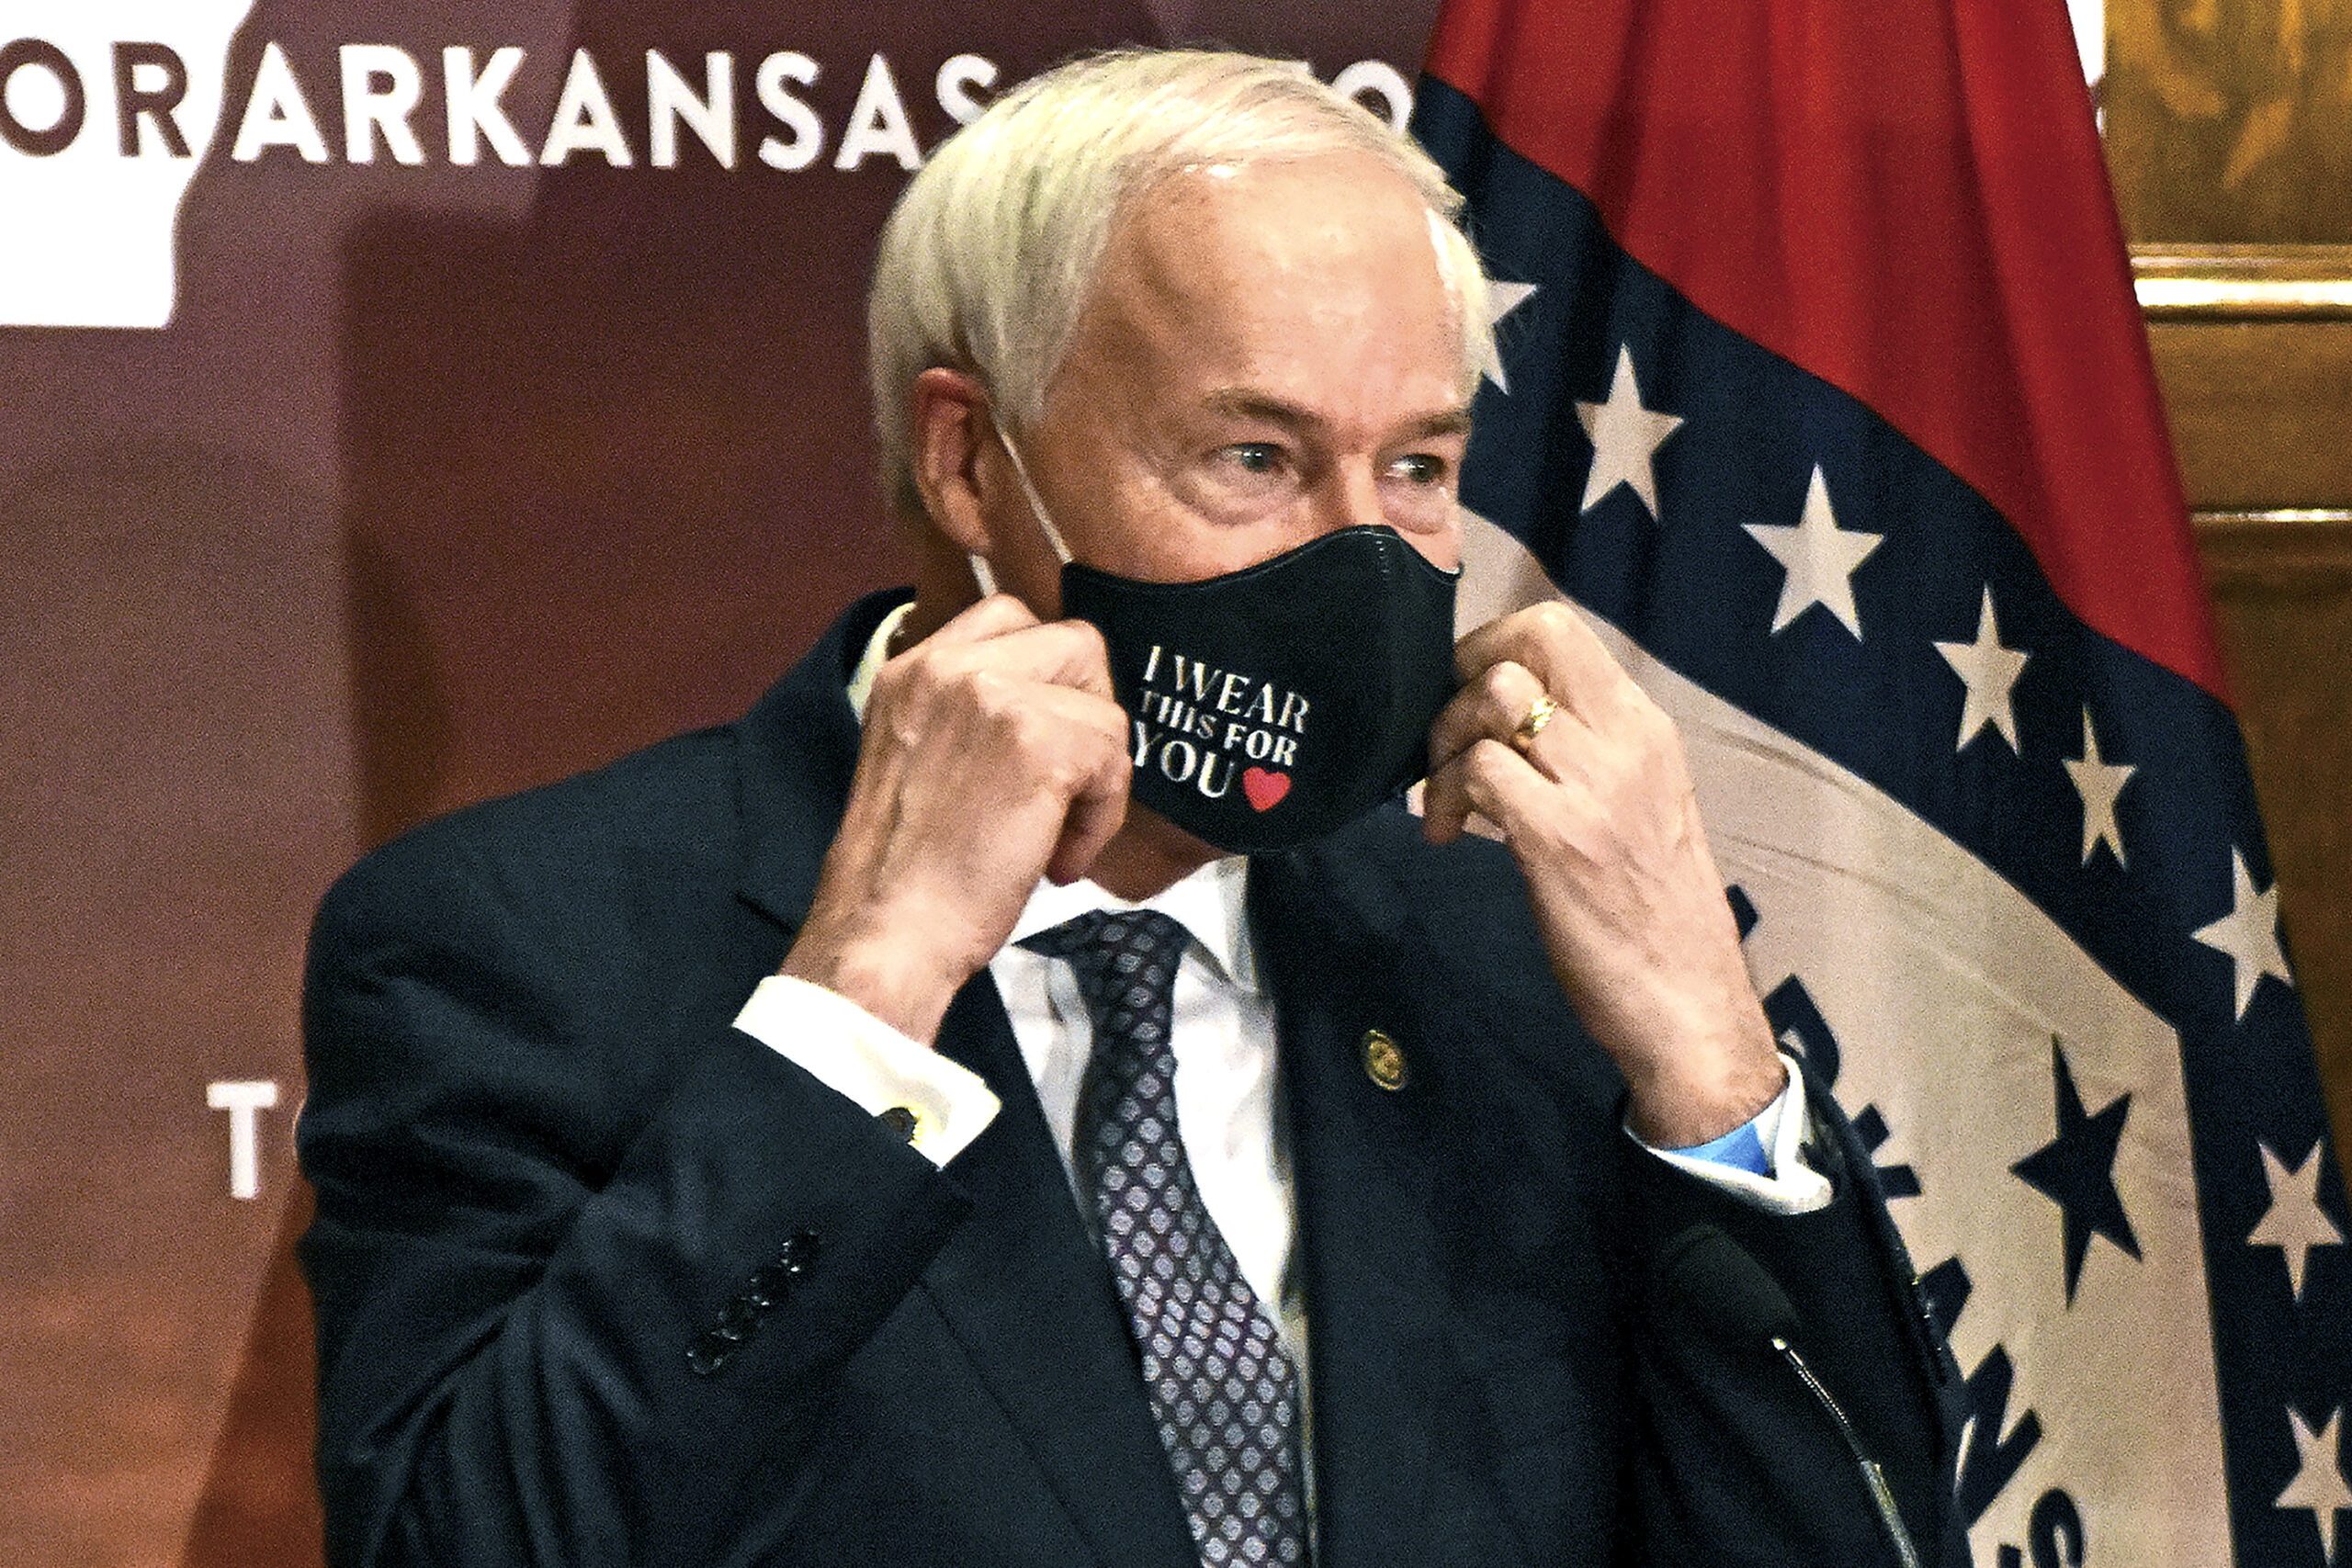 Arkansas Lawmakers Override Governor And Enact Ban On Sex Change